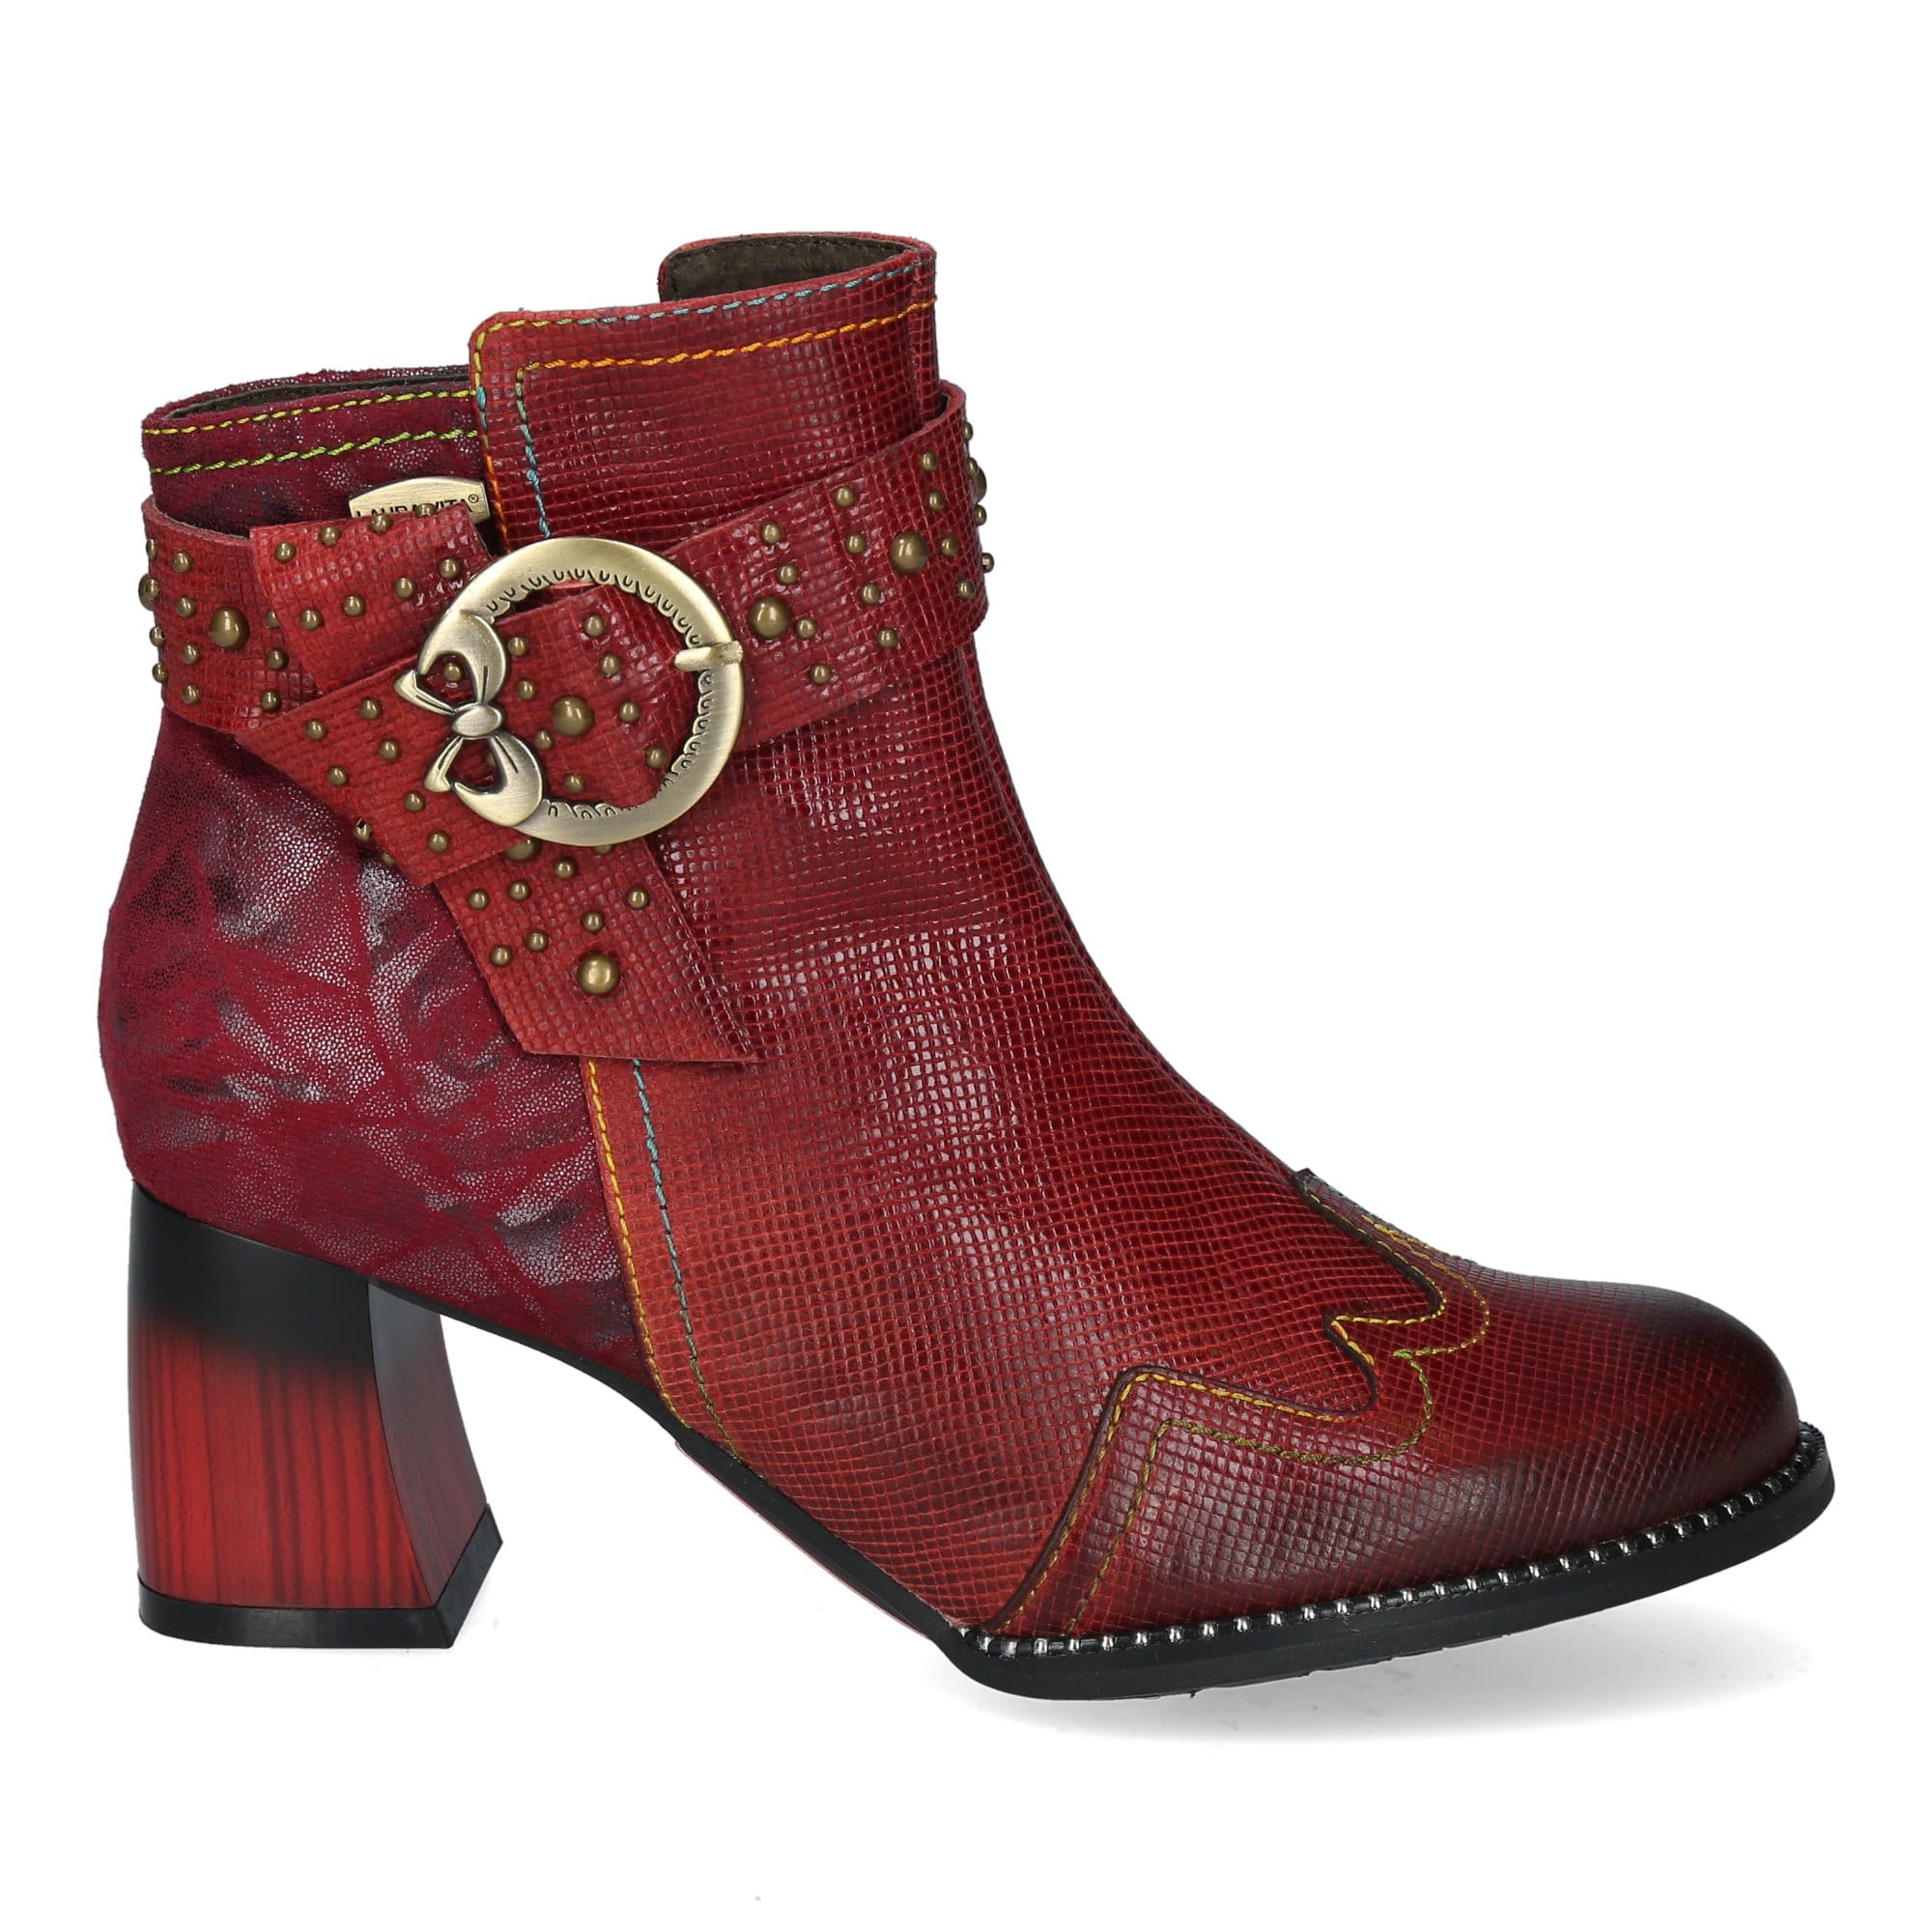 Chaussure IDCORAO 06 - 35 / Rouge - Boots